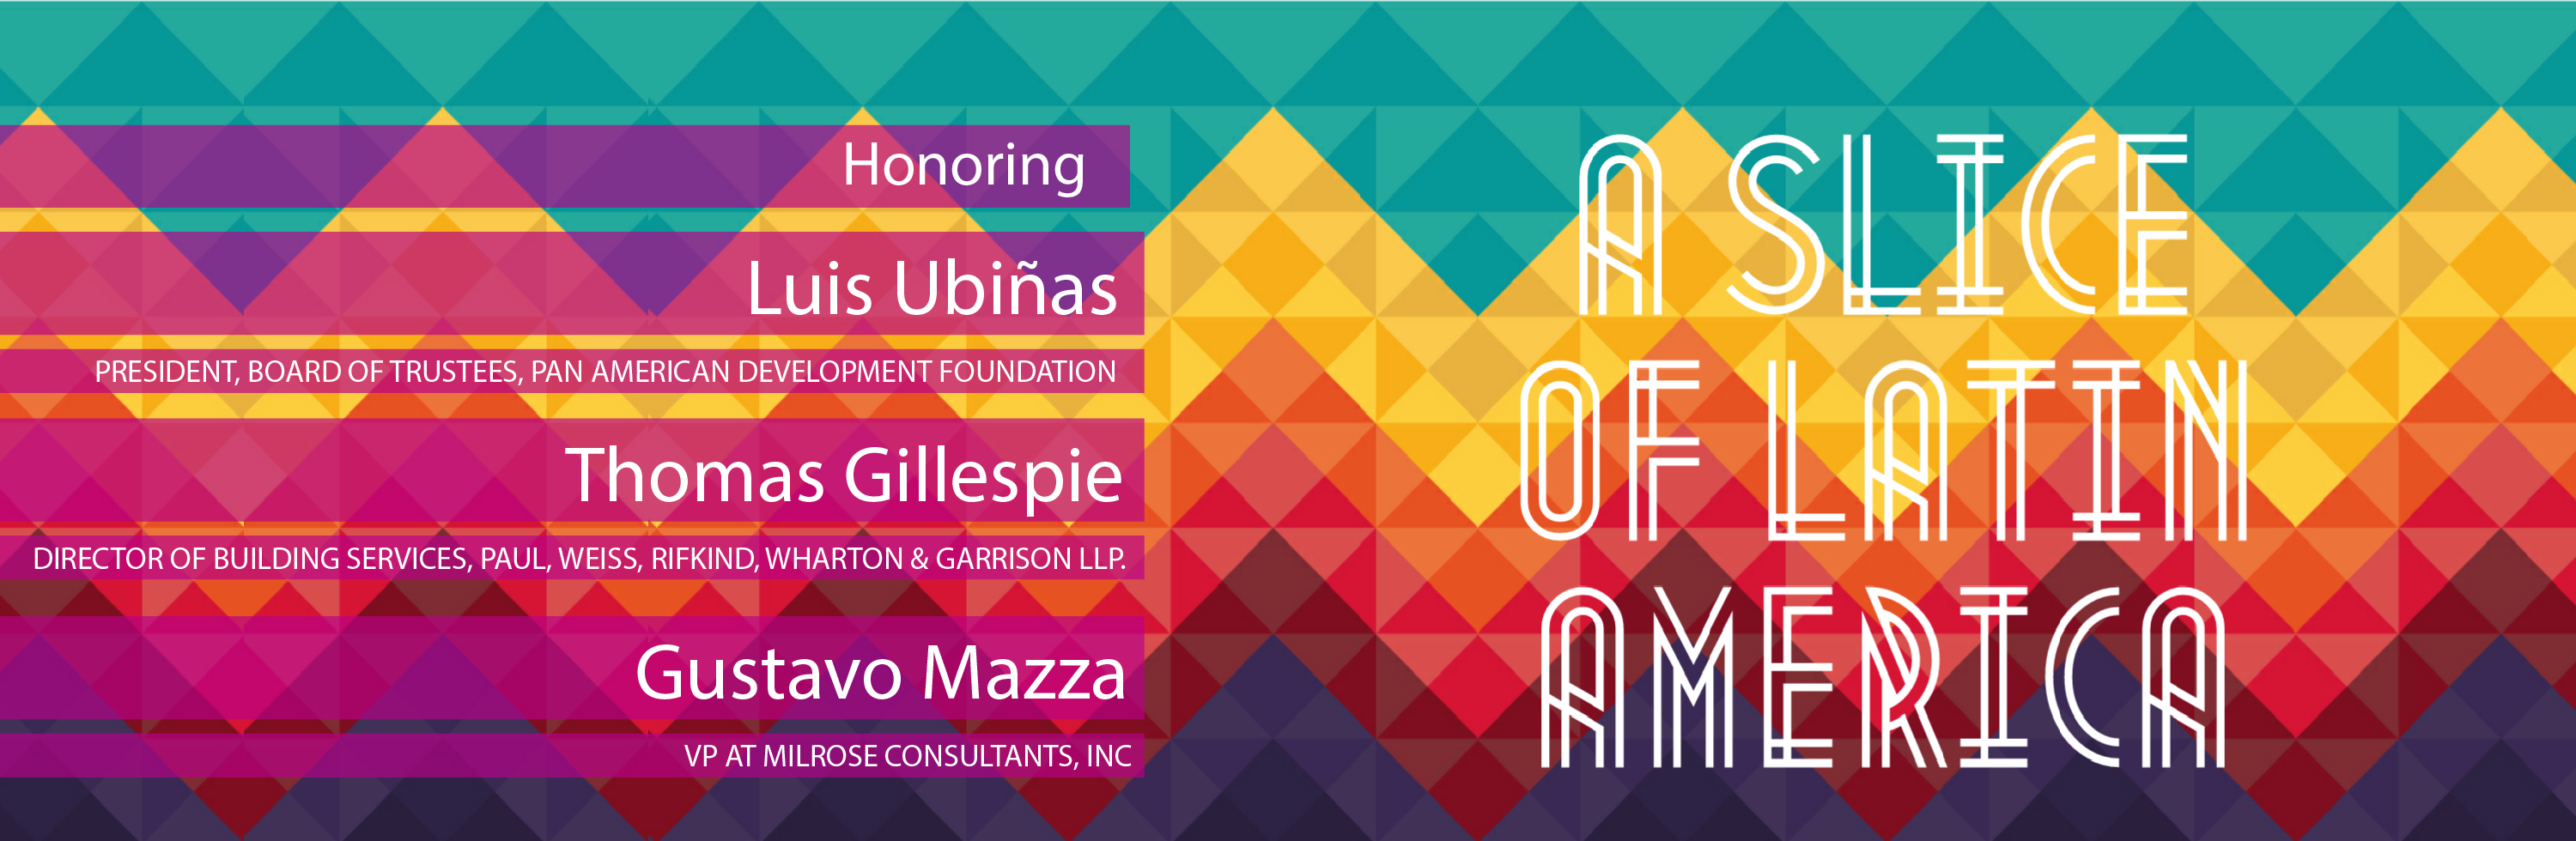 Please join us in honoring Milrose VP Gustavo L. Mazza at the CHCF 17th Annual Awards Gala, A Slice of Latin America on March 9, 2017